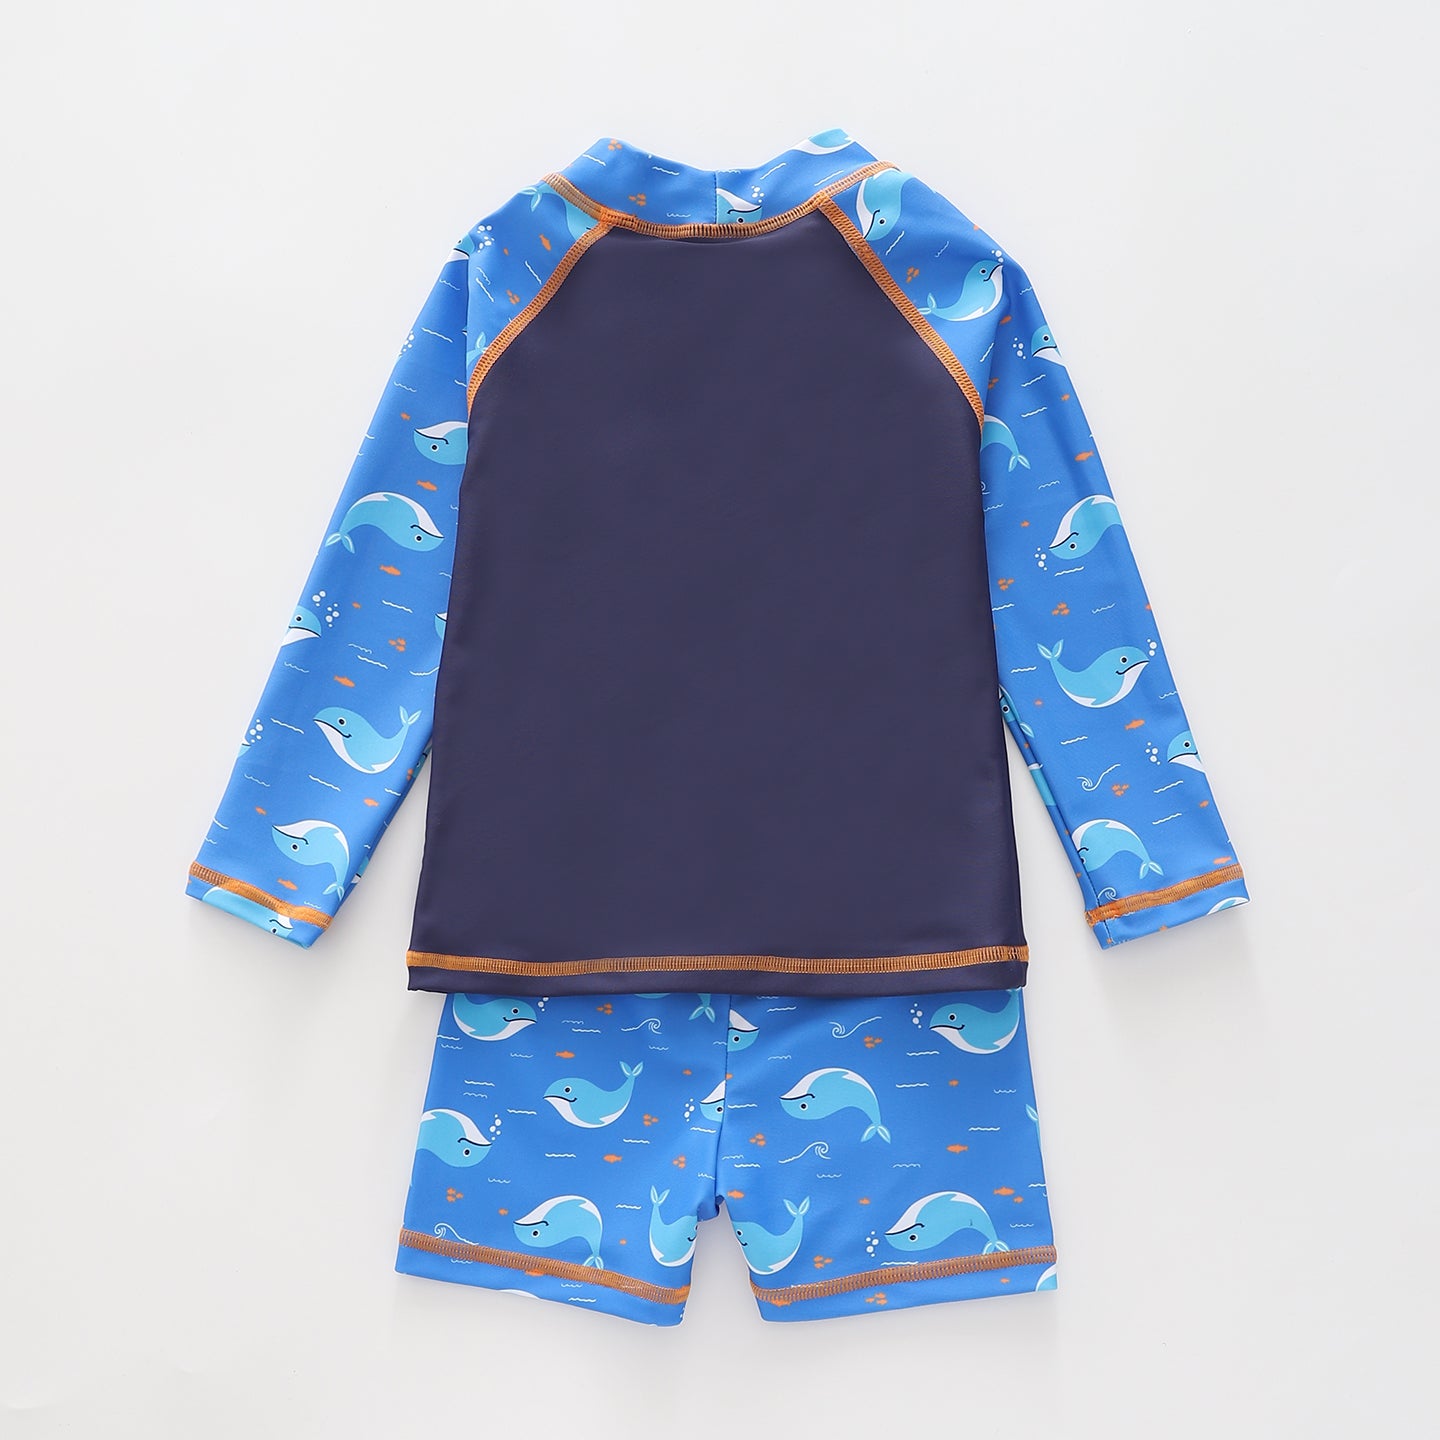 Boy's Blue and Orange Whale Print Two Piece Swimsuit Set